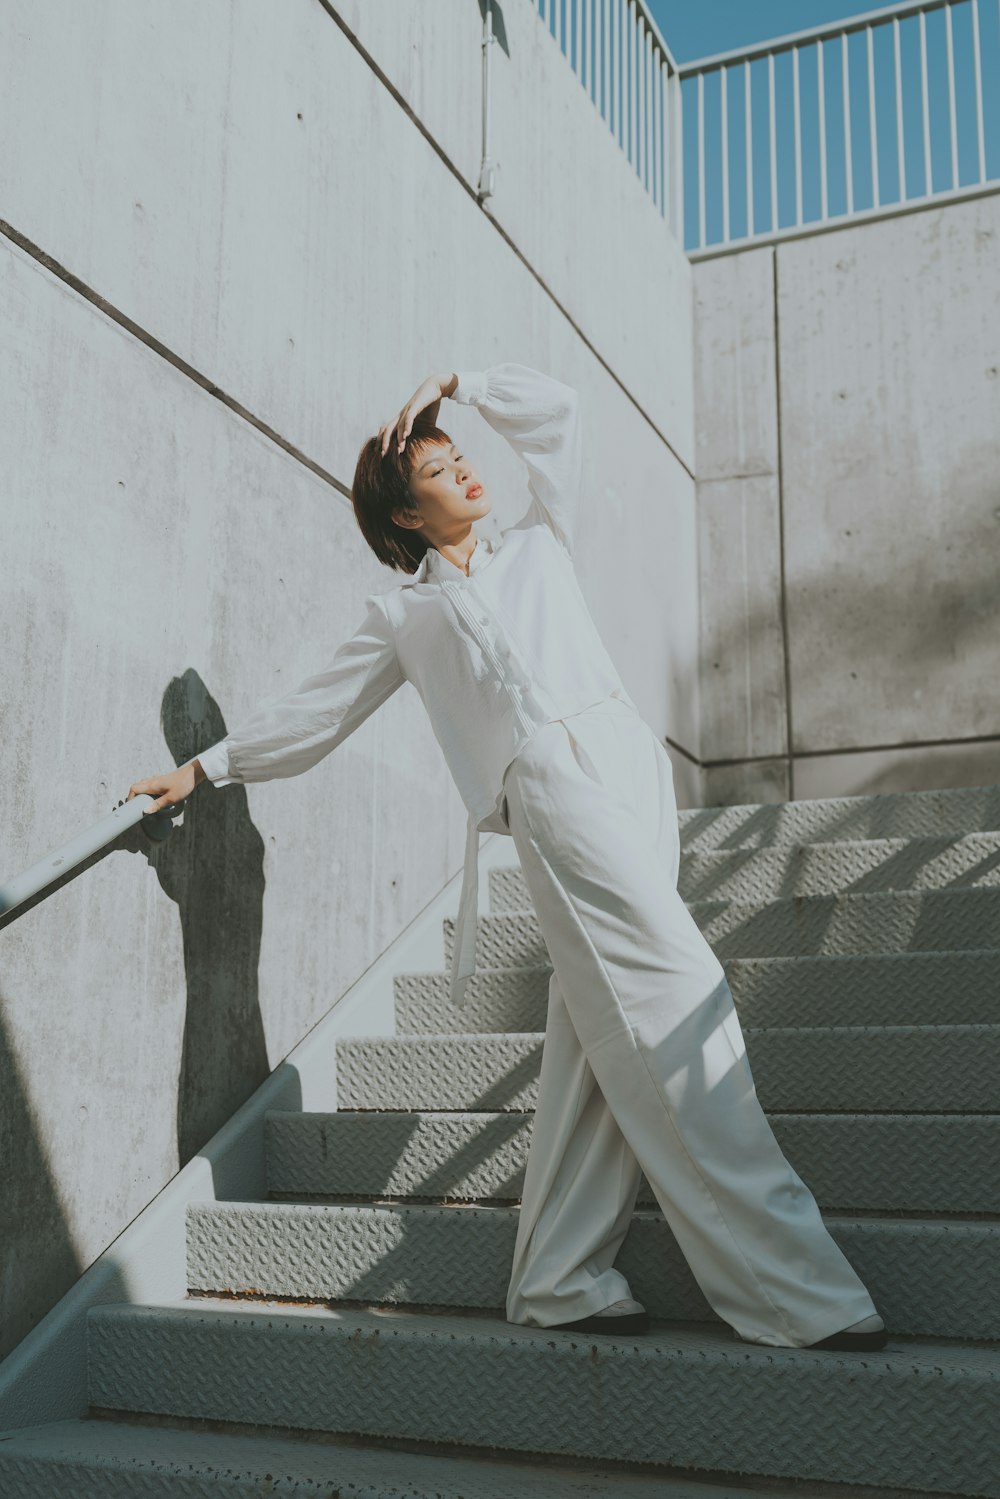 a person in a white suit